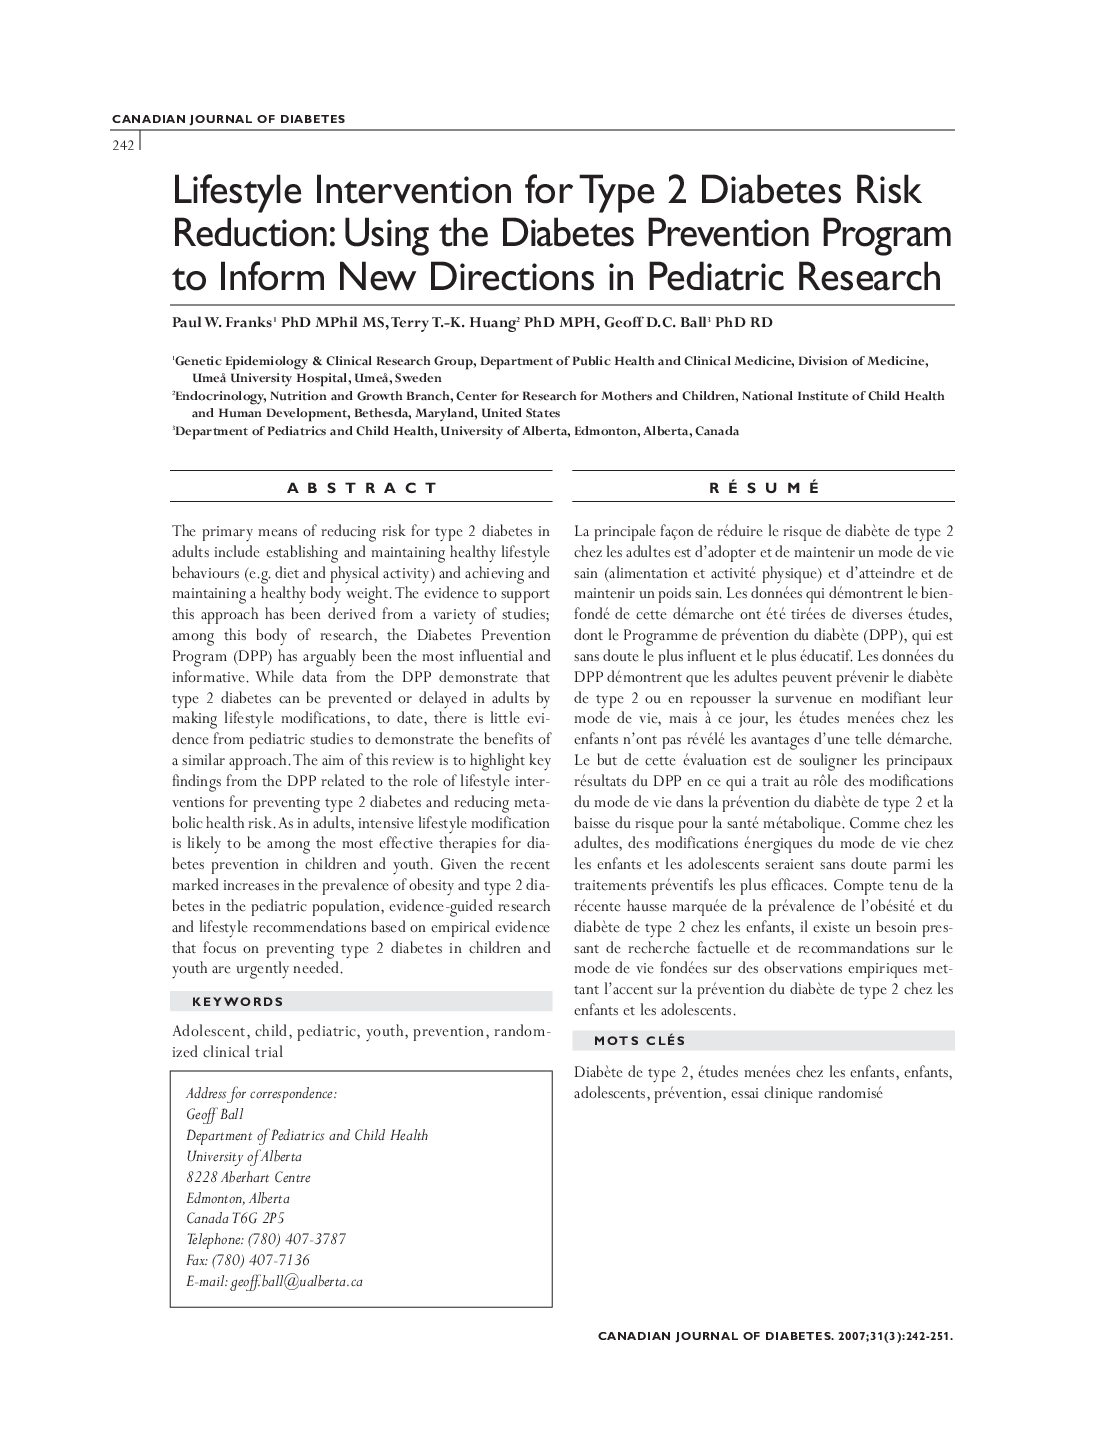 Lifestyle Intervention for Type 2 Diabetes Risk Reduction: Using the Diabetes Prevention Program to Inform New Directions in Pediatric Research